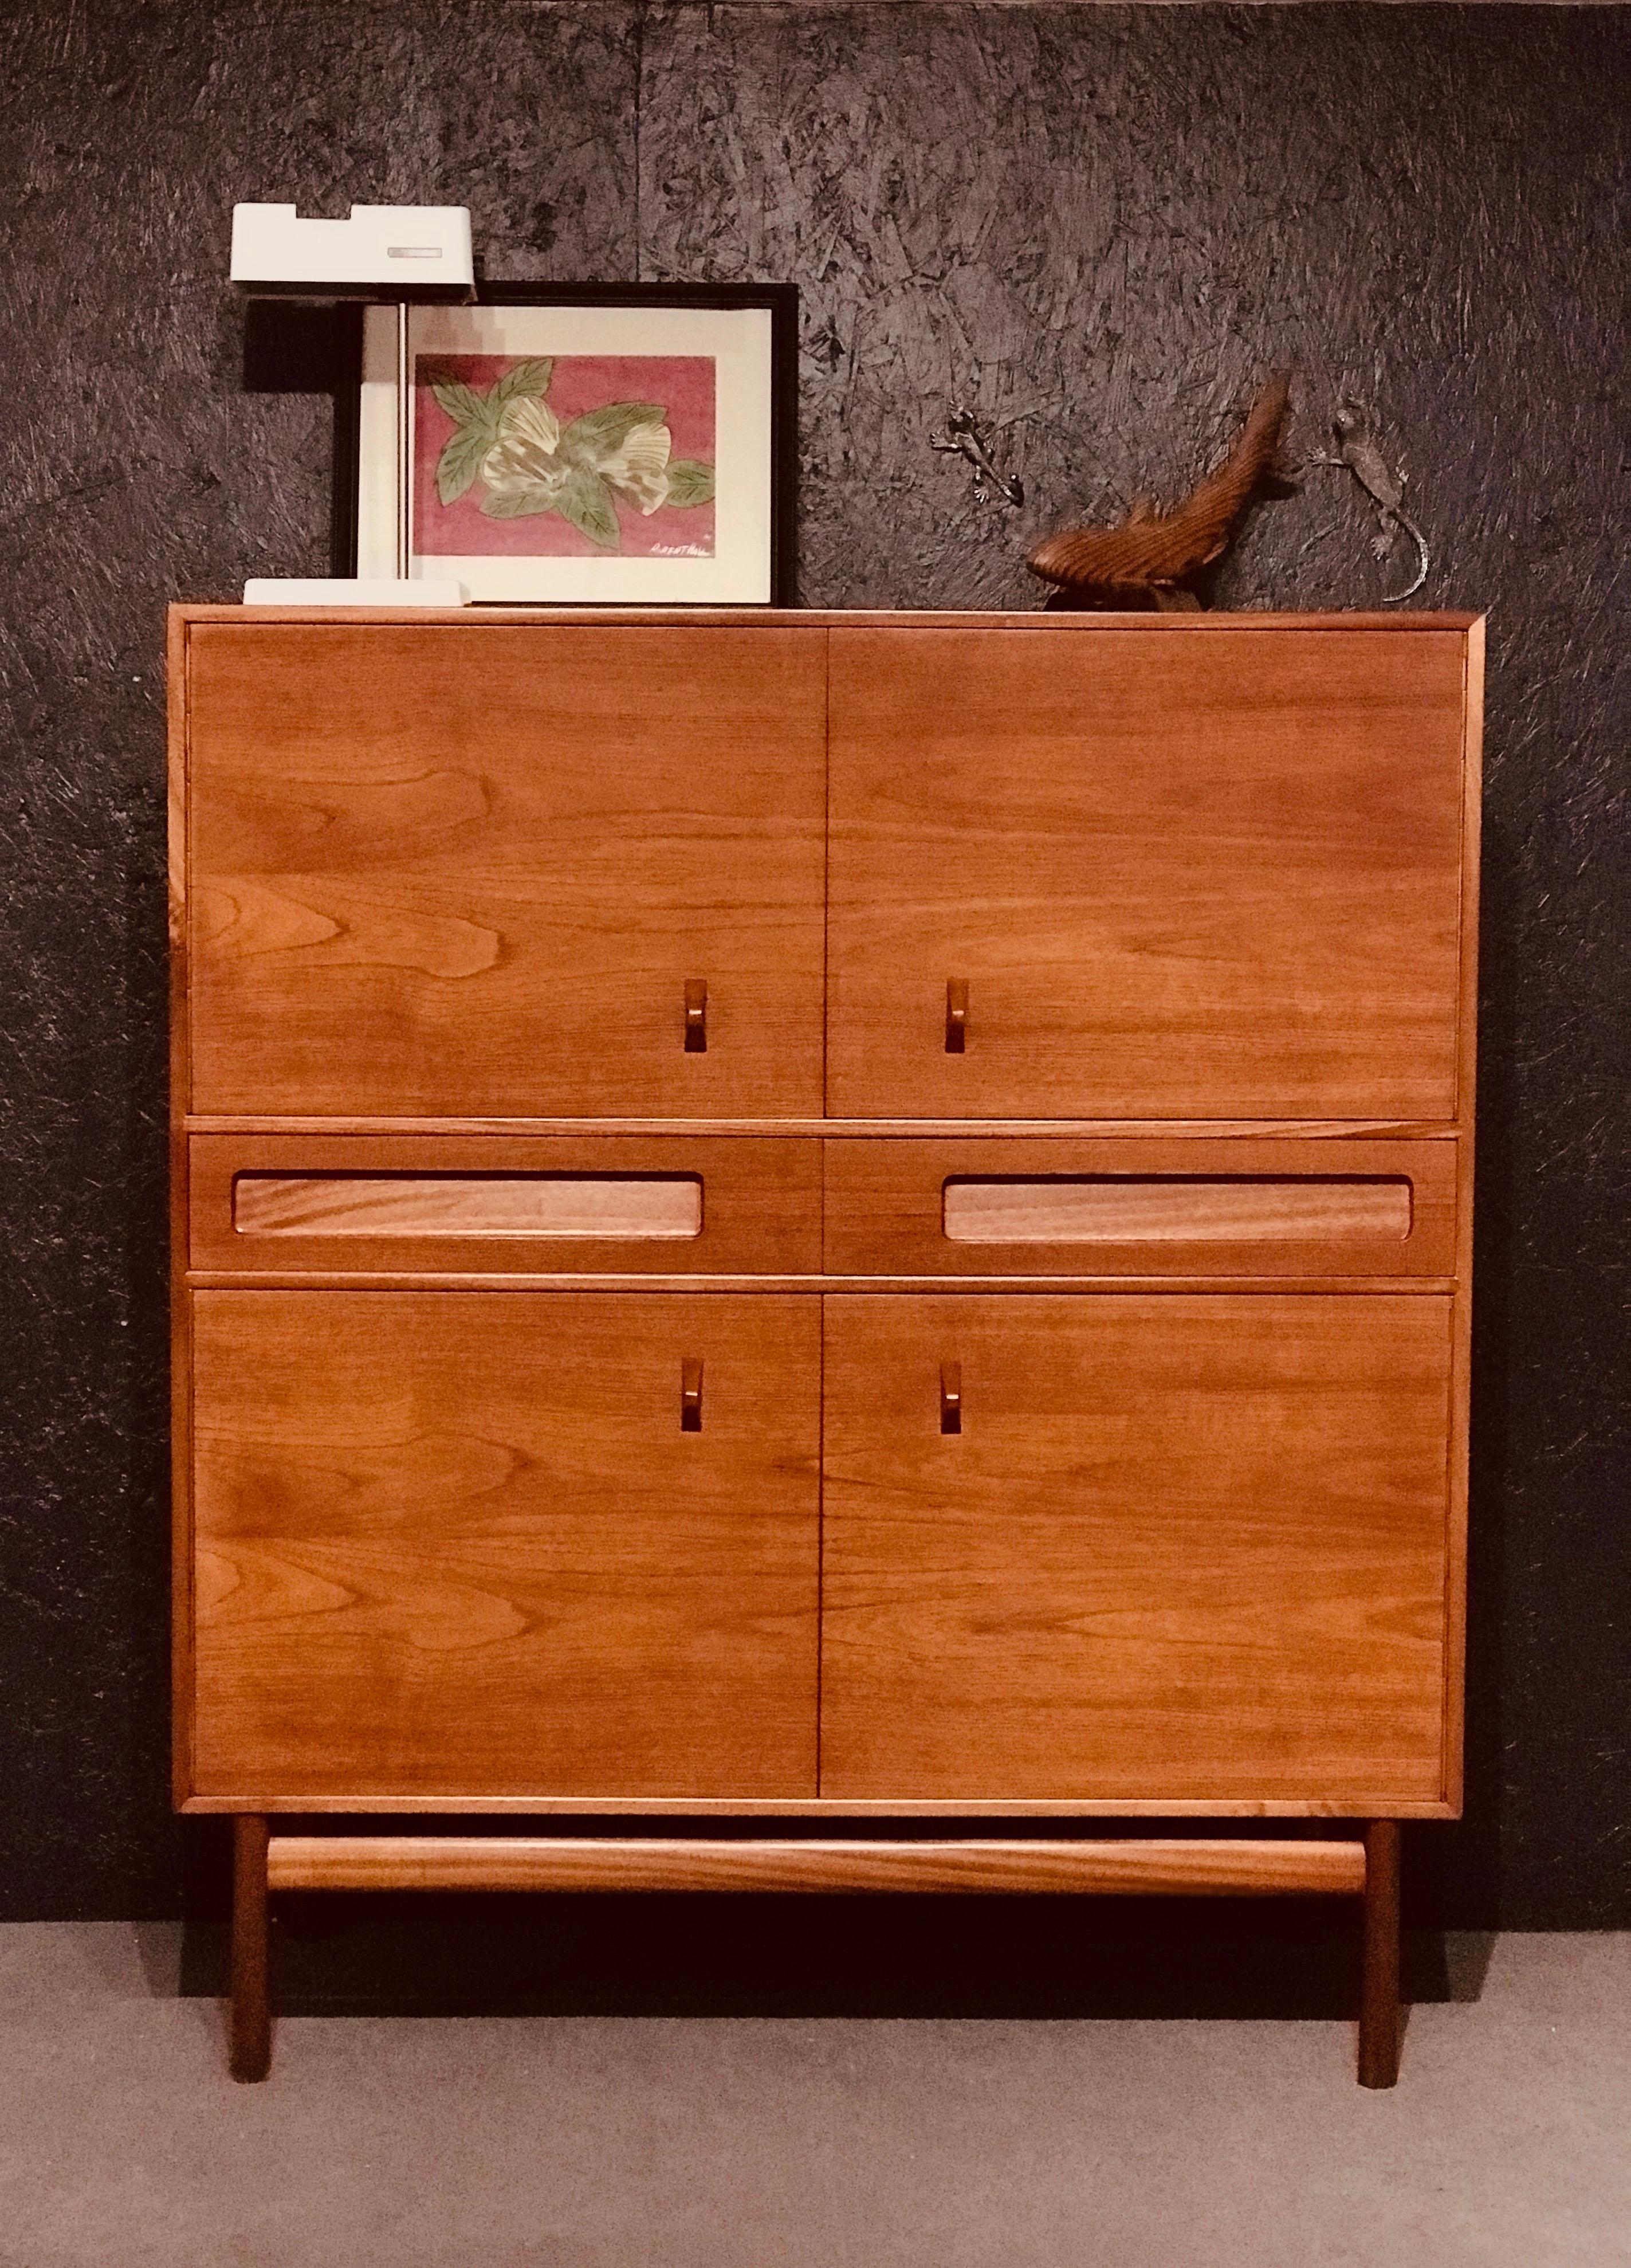 Tom Robertson designed this sideboard in the early ’70s for the well-known brand A.H. McIntosh in Scotland. This time, Tom Robertson made a taller sideboard—this beautiful cabinet with four cupboards and two teakwood drawers. The sideboard has four